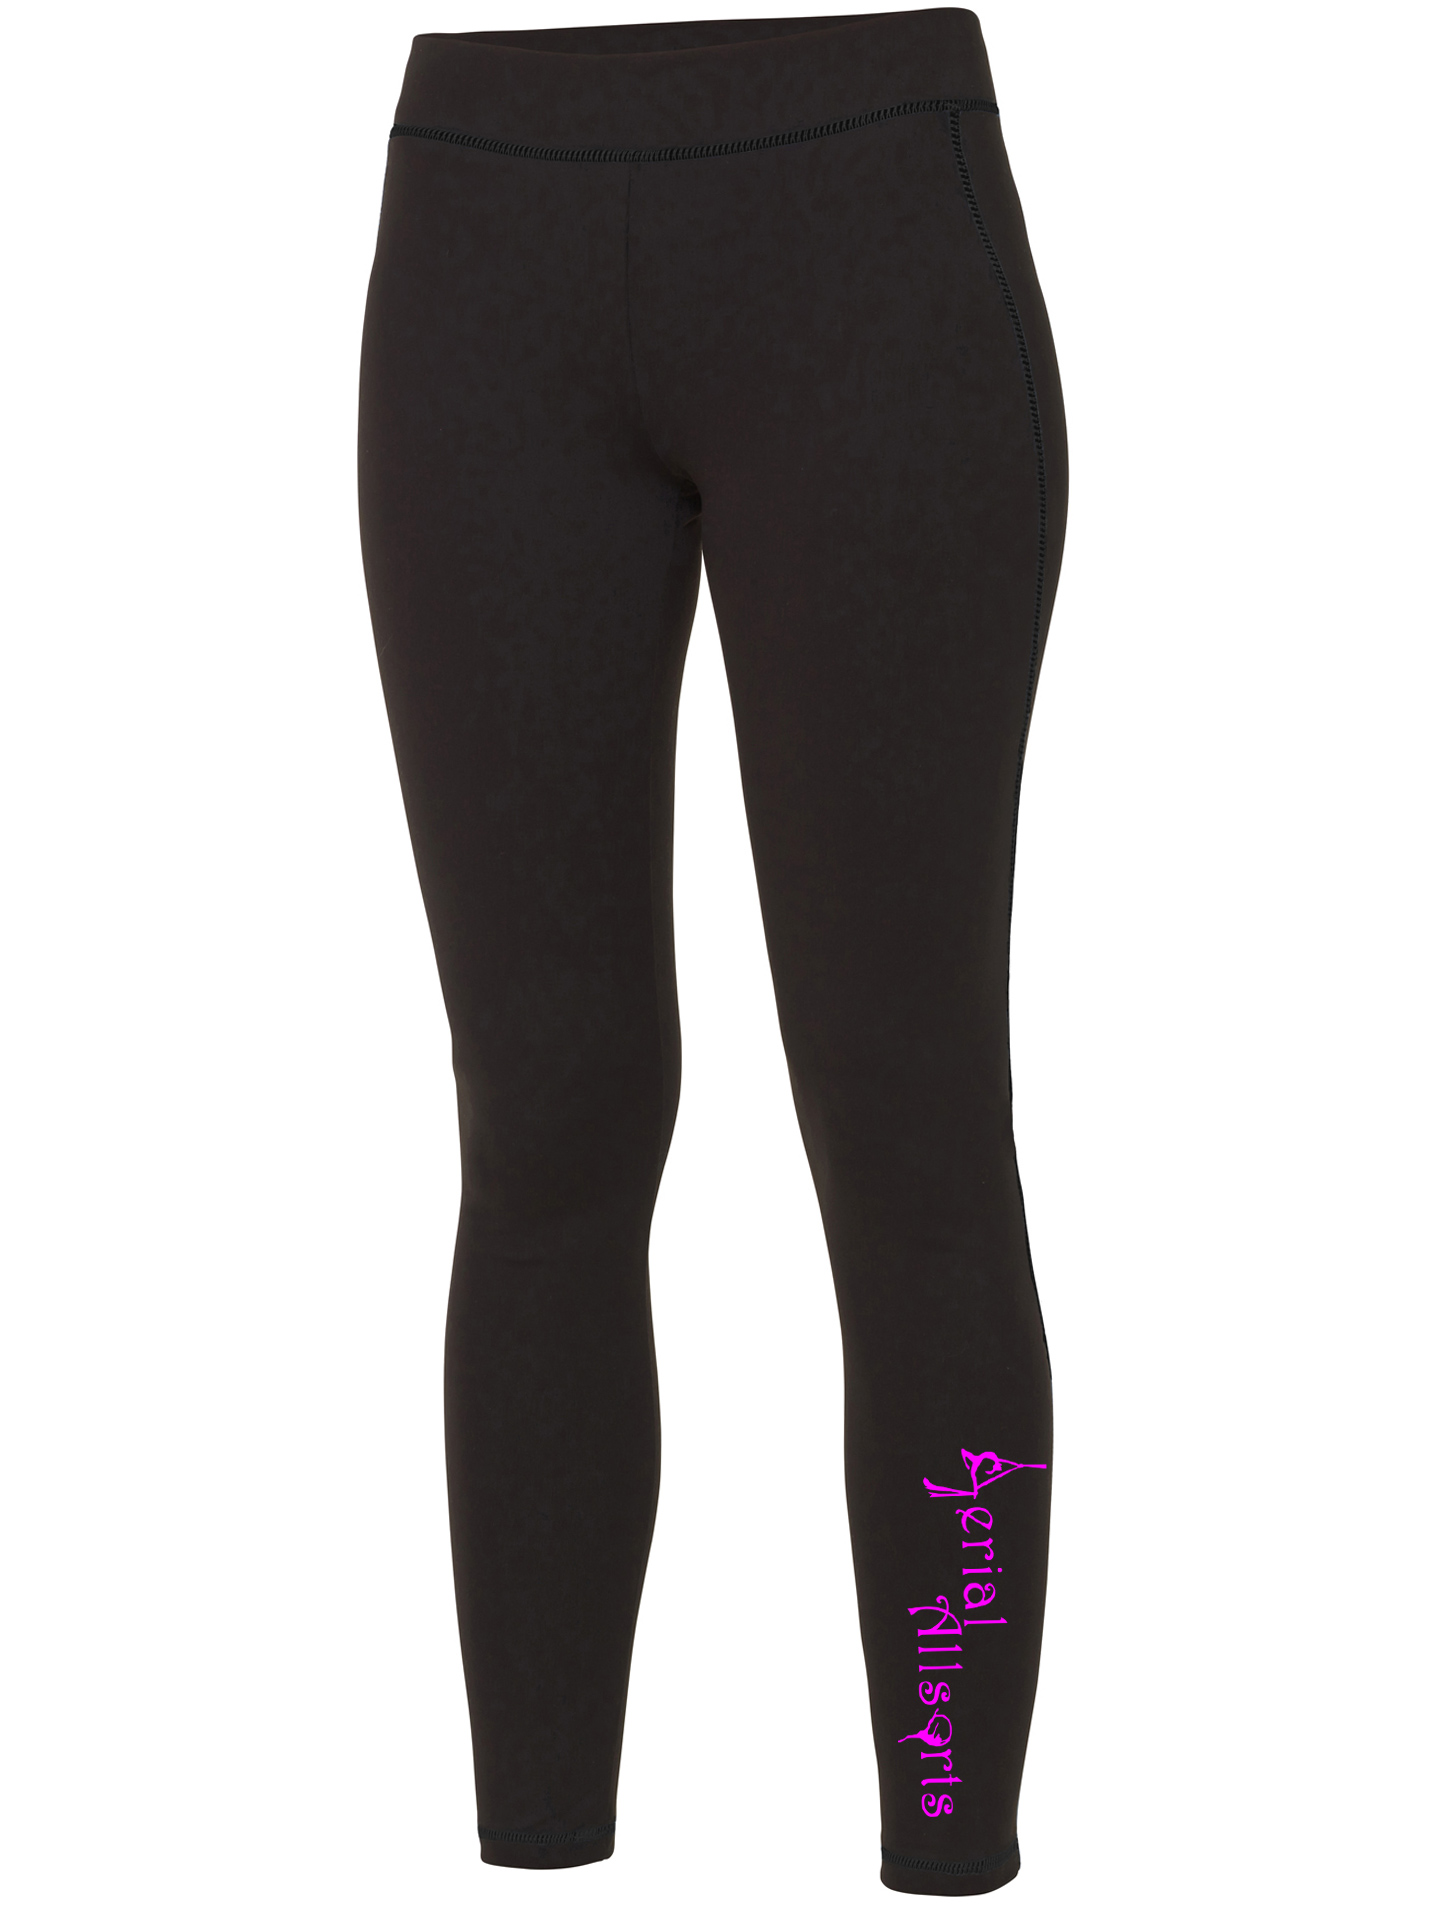 Aerial Allsorts Plymouth Cool Athletic Leggings | Rock the Dragon